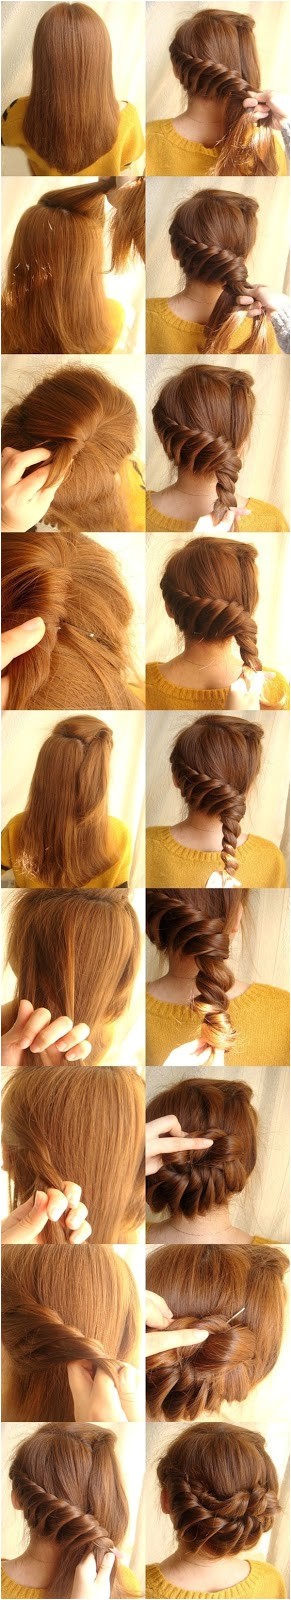 step by step hairstyles easy made